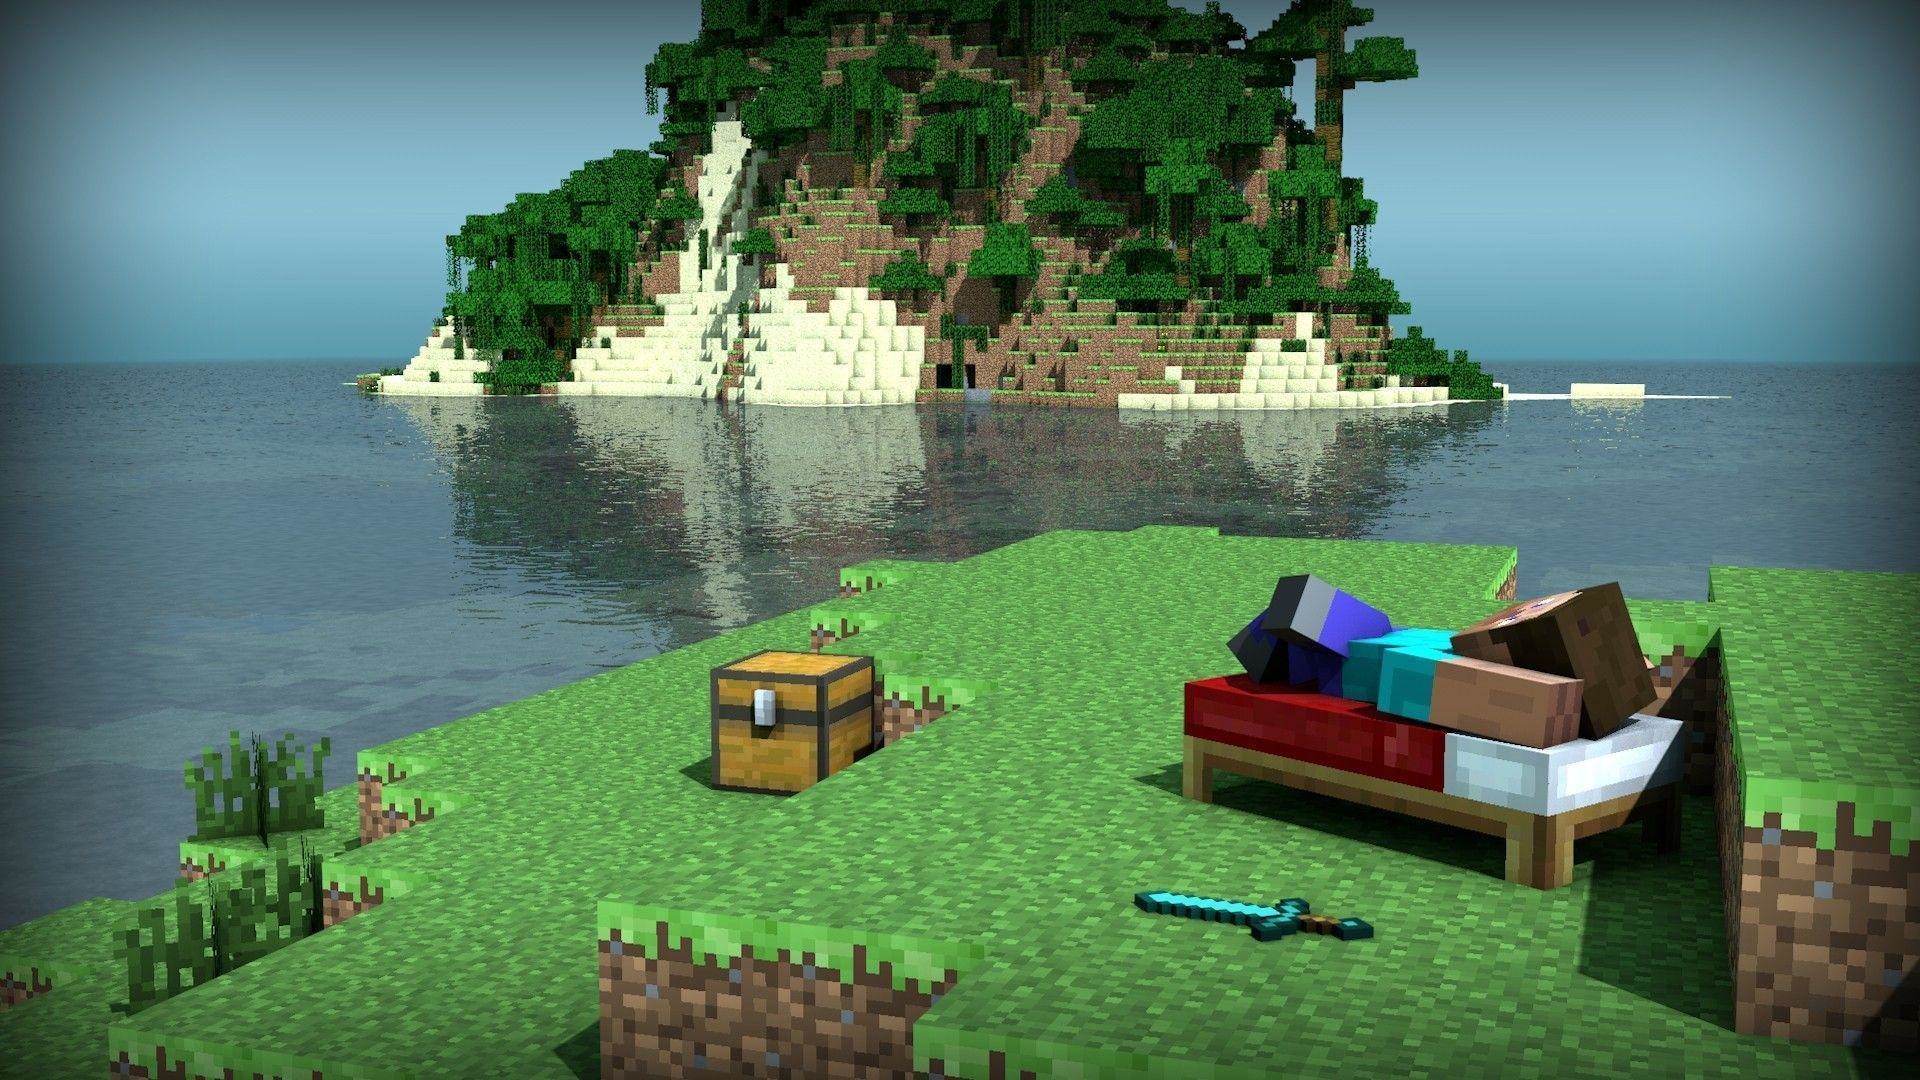 1920x1080 225 Minecraft Wallpapers | Minecraft Backgrounds